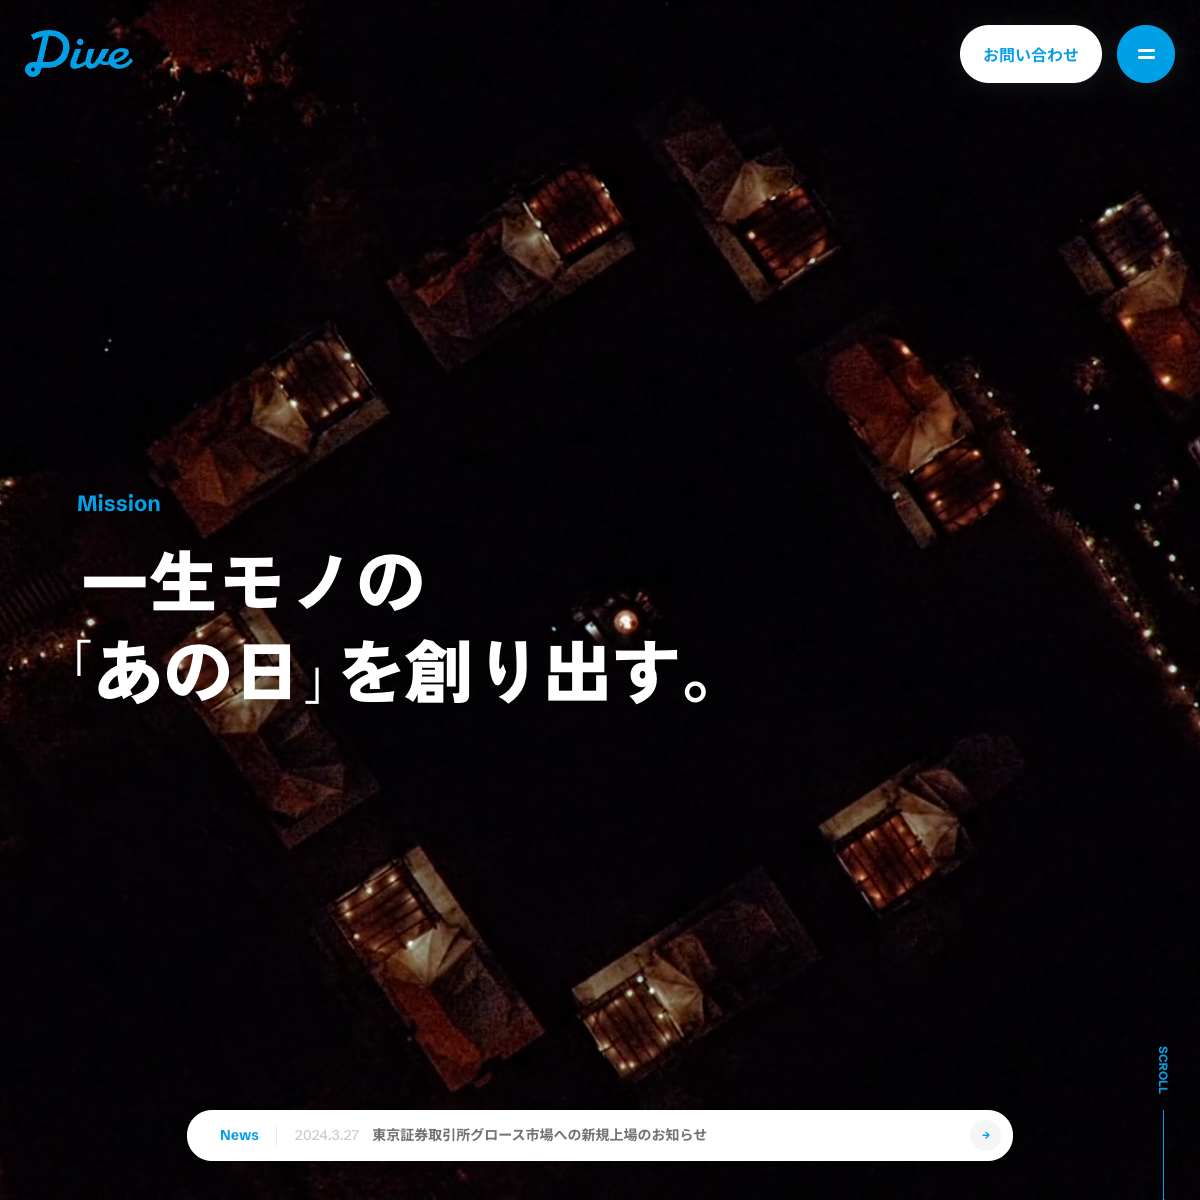 Dive｜株式会社ダイブのファーストビューの画像